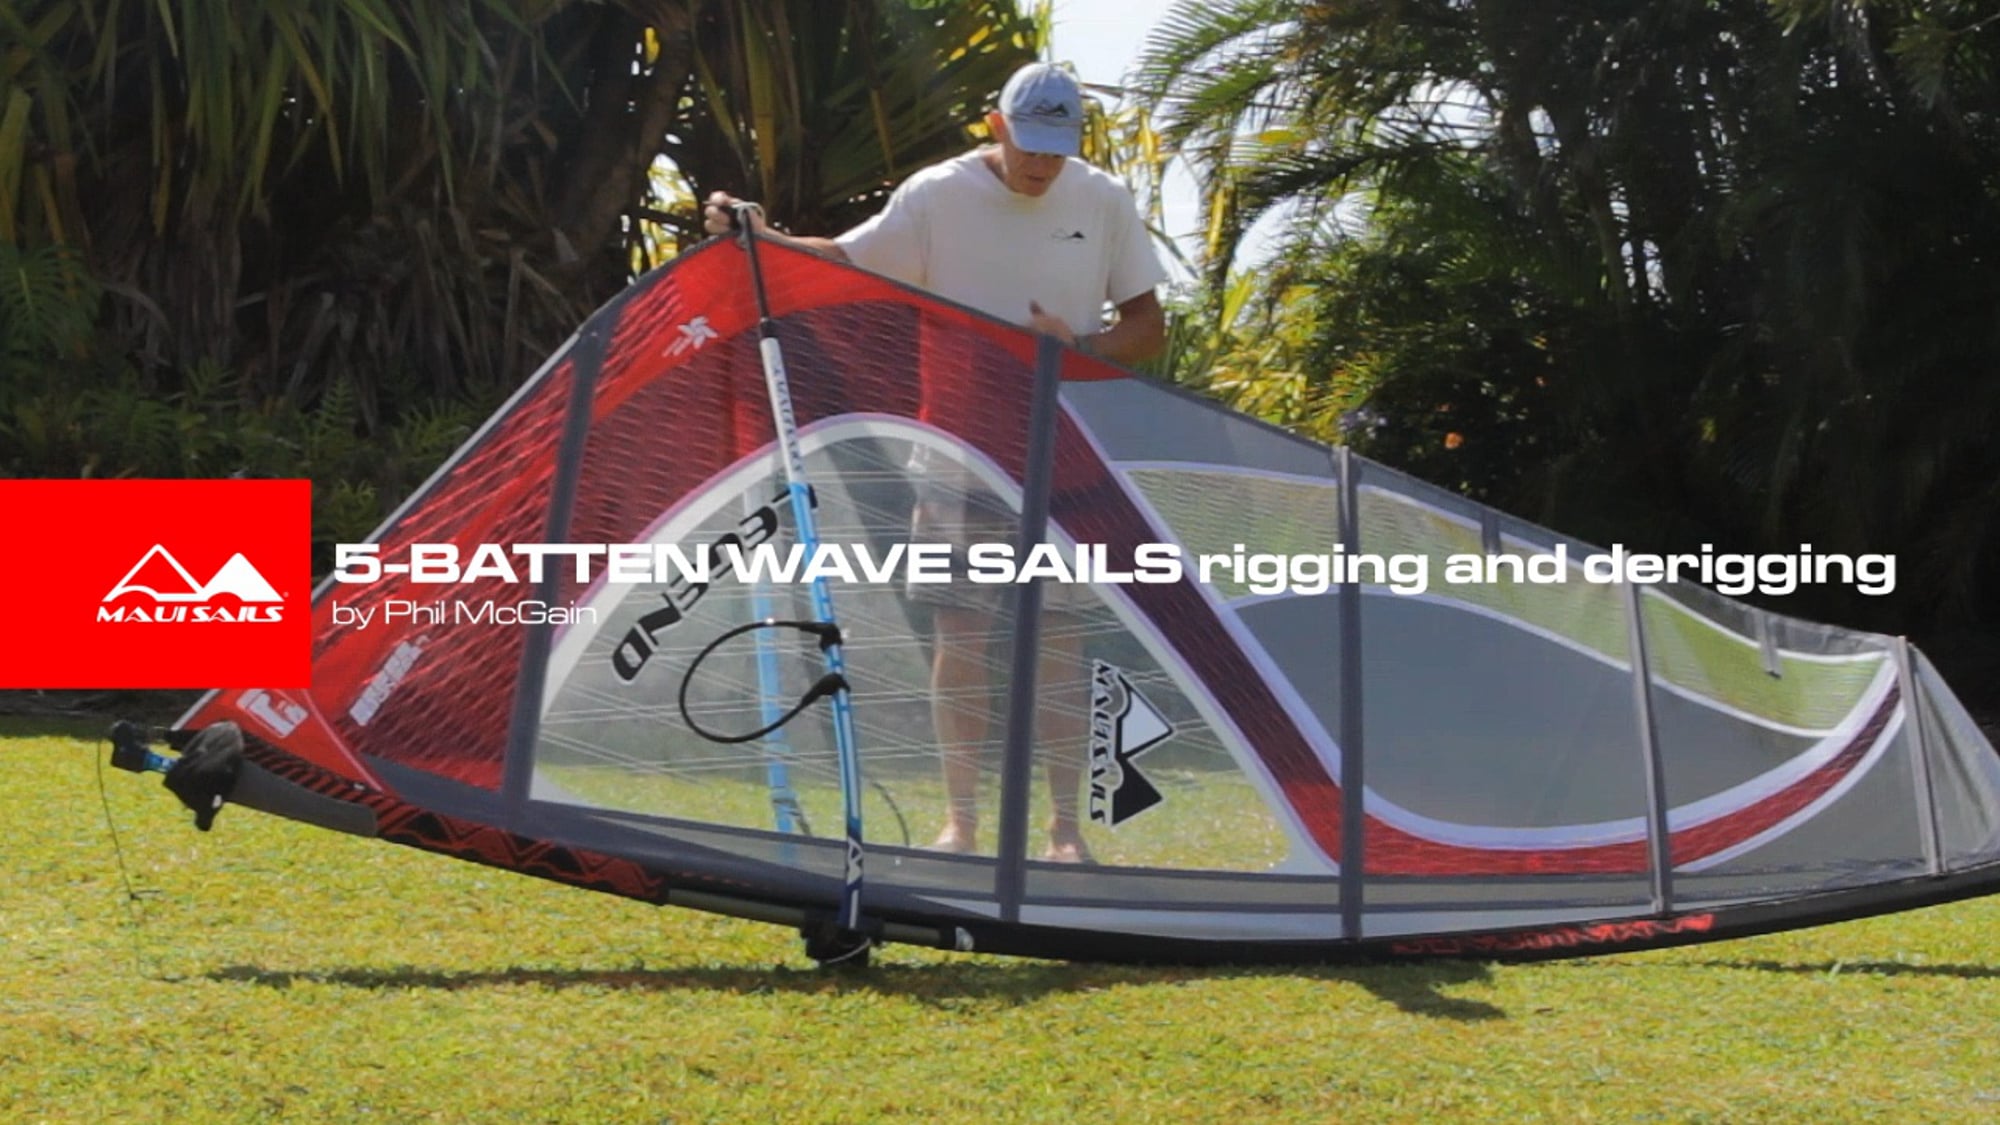 Wave Sails (5-batten) rigging and derigging guide Windsurfing Videos MauiSails Hawaii